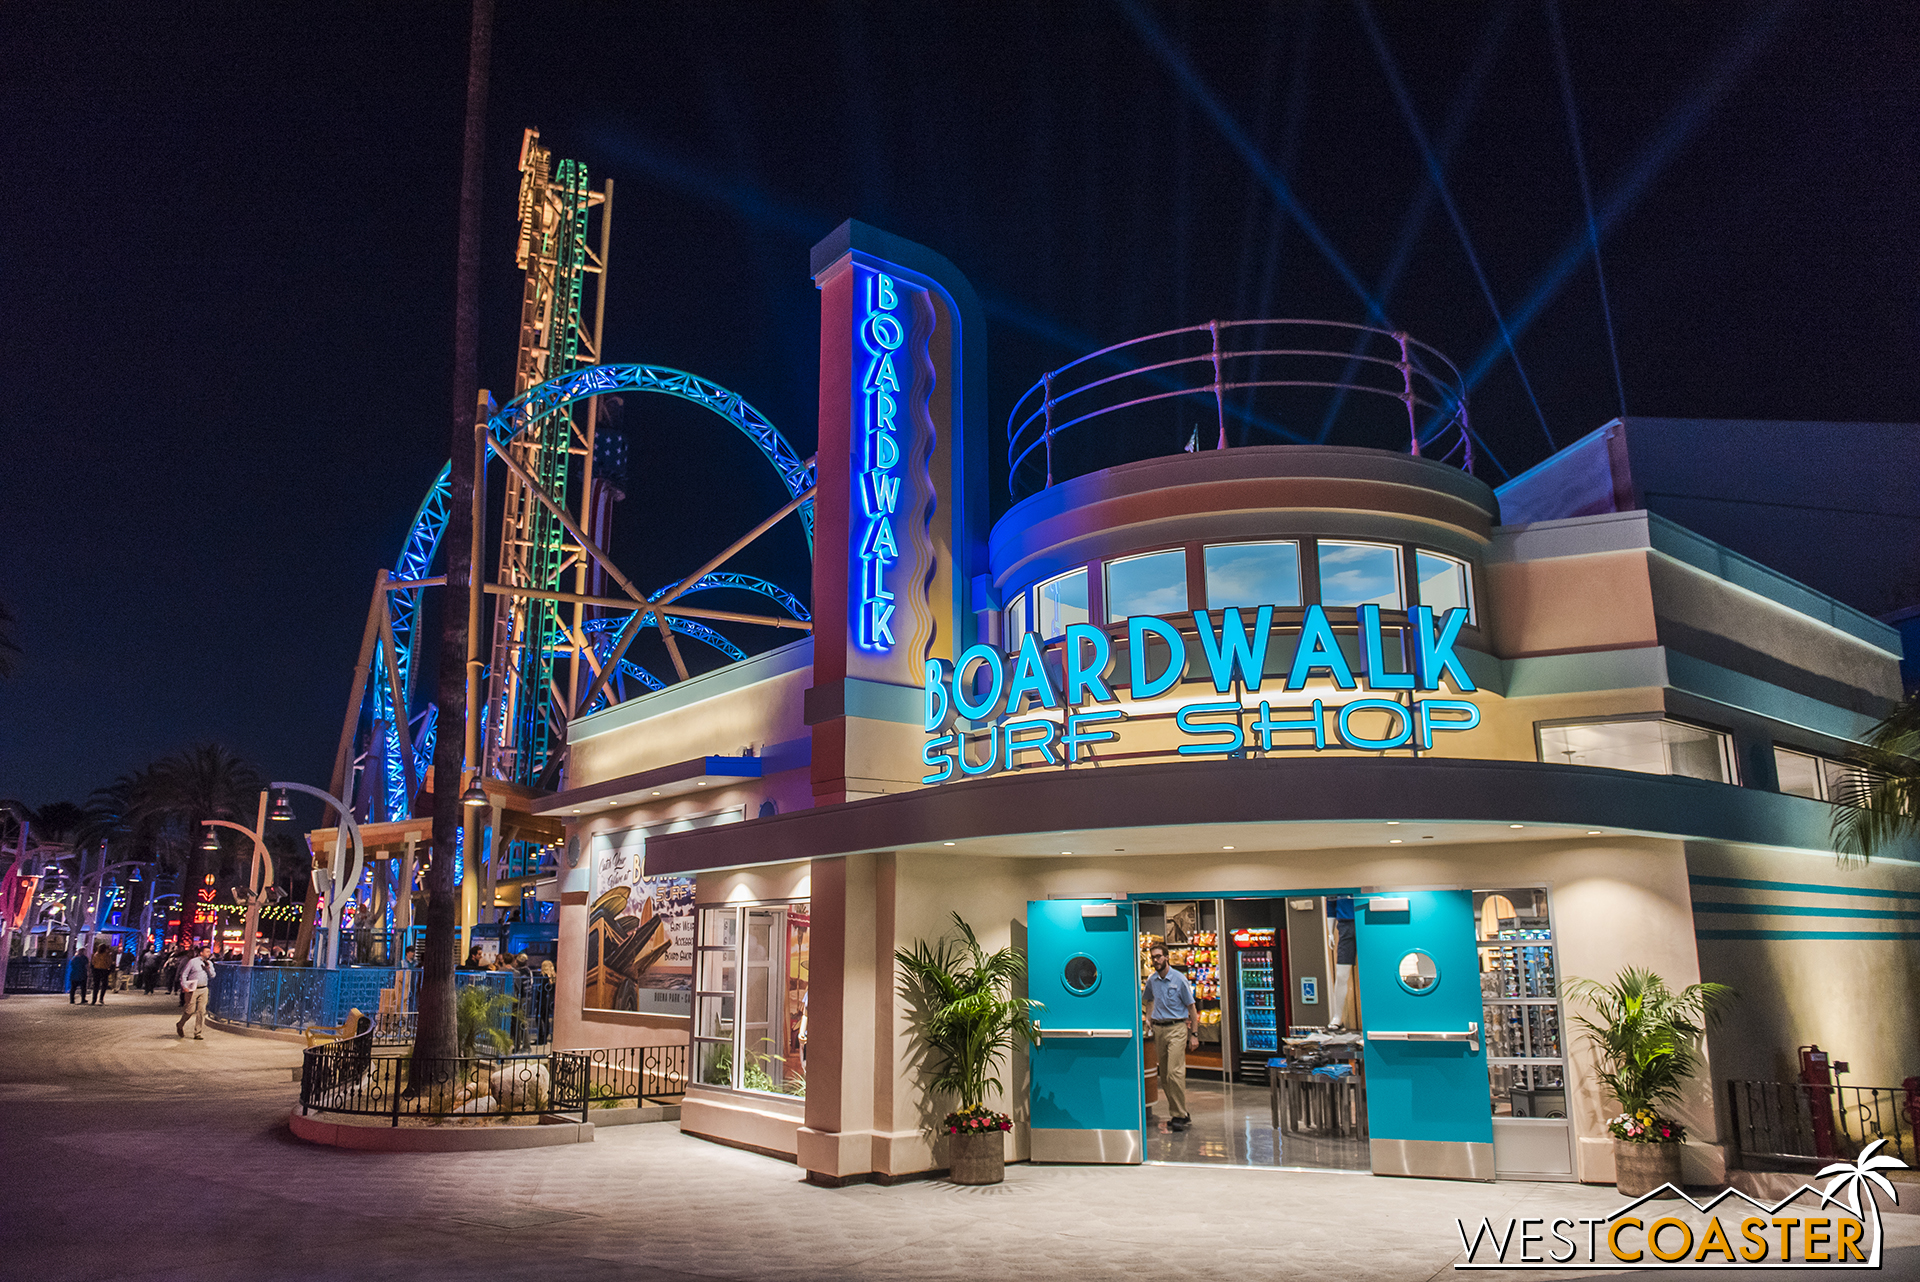  The Boardwalk Surf Shop looks great at night! 